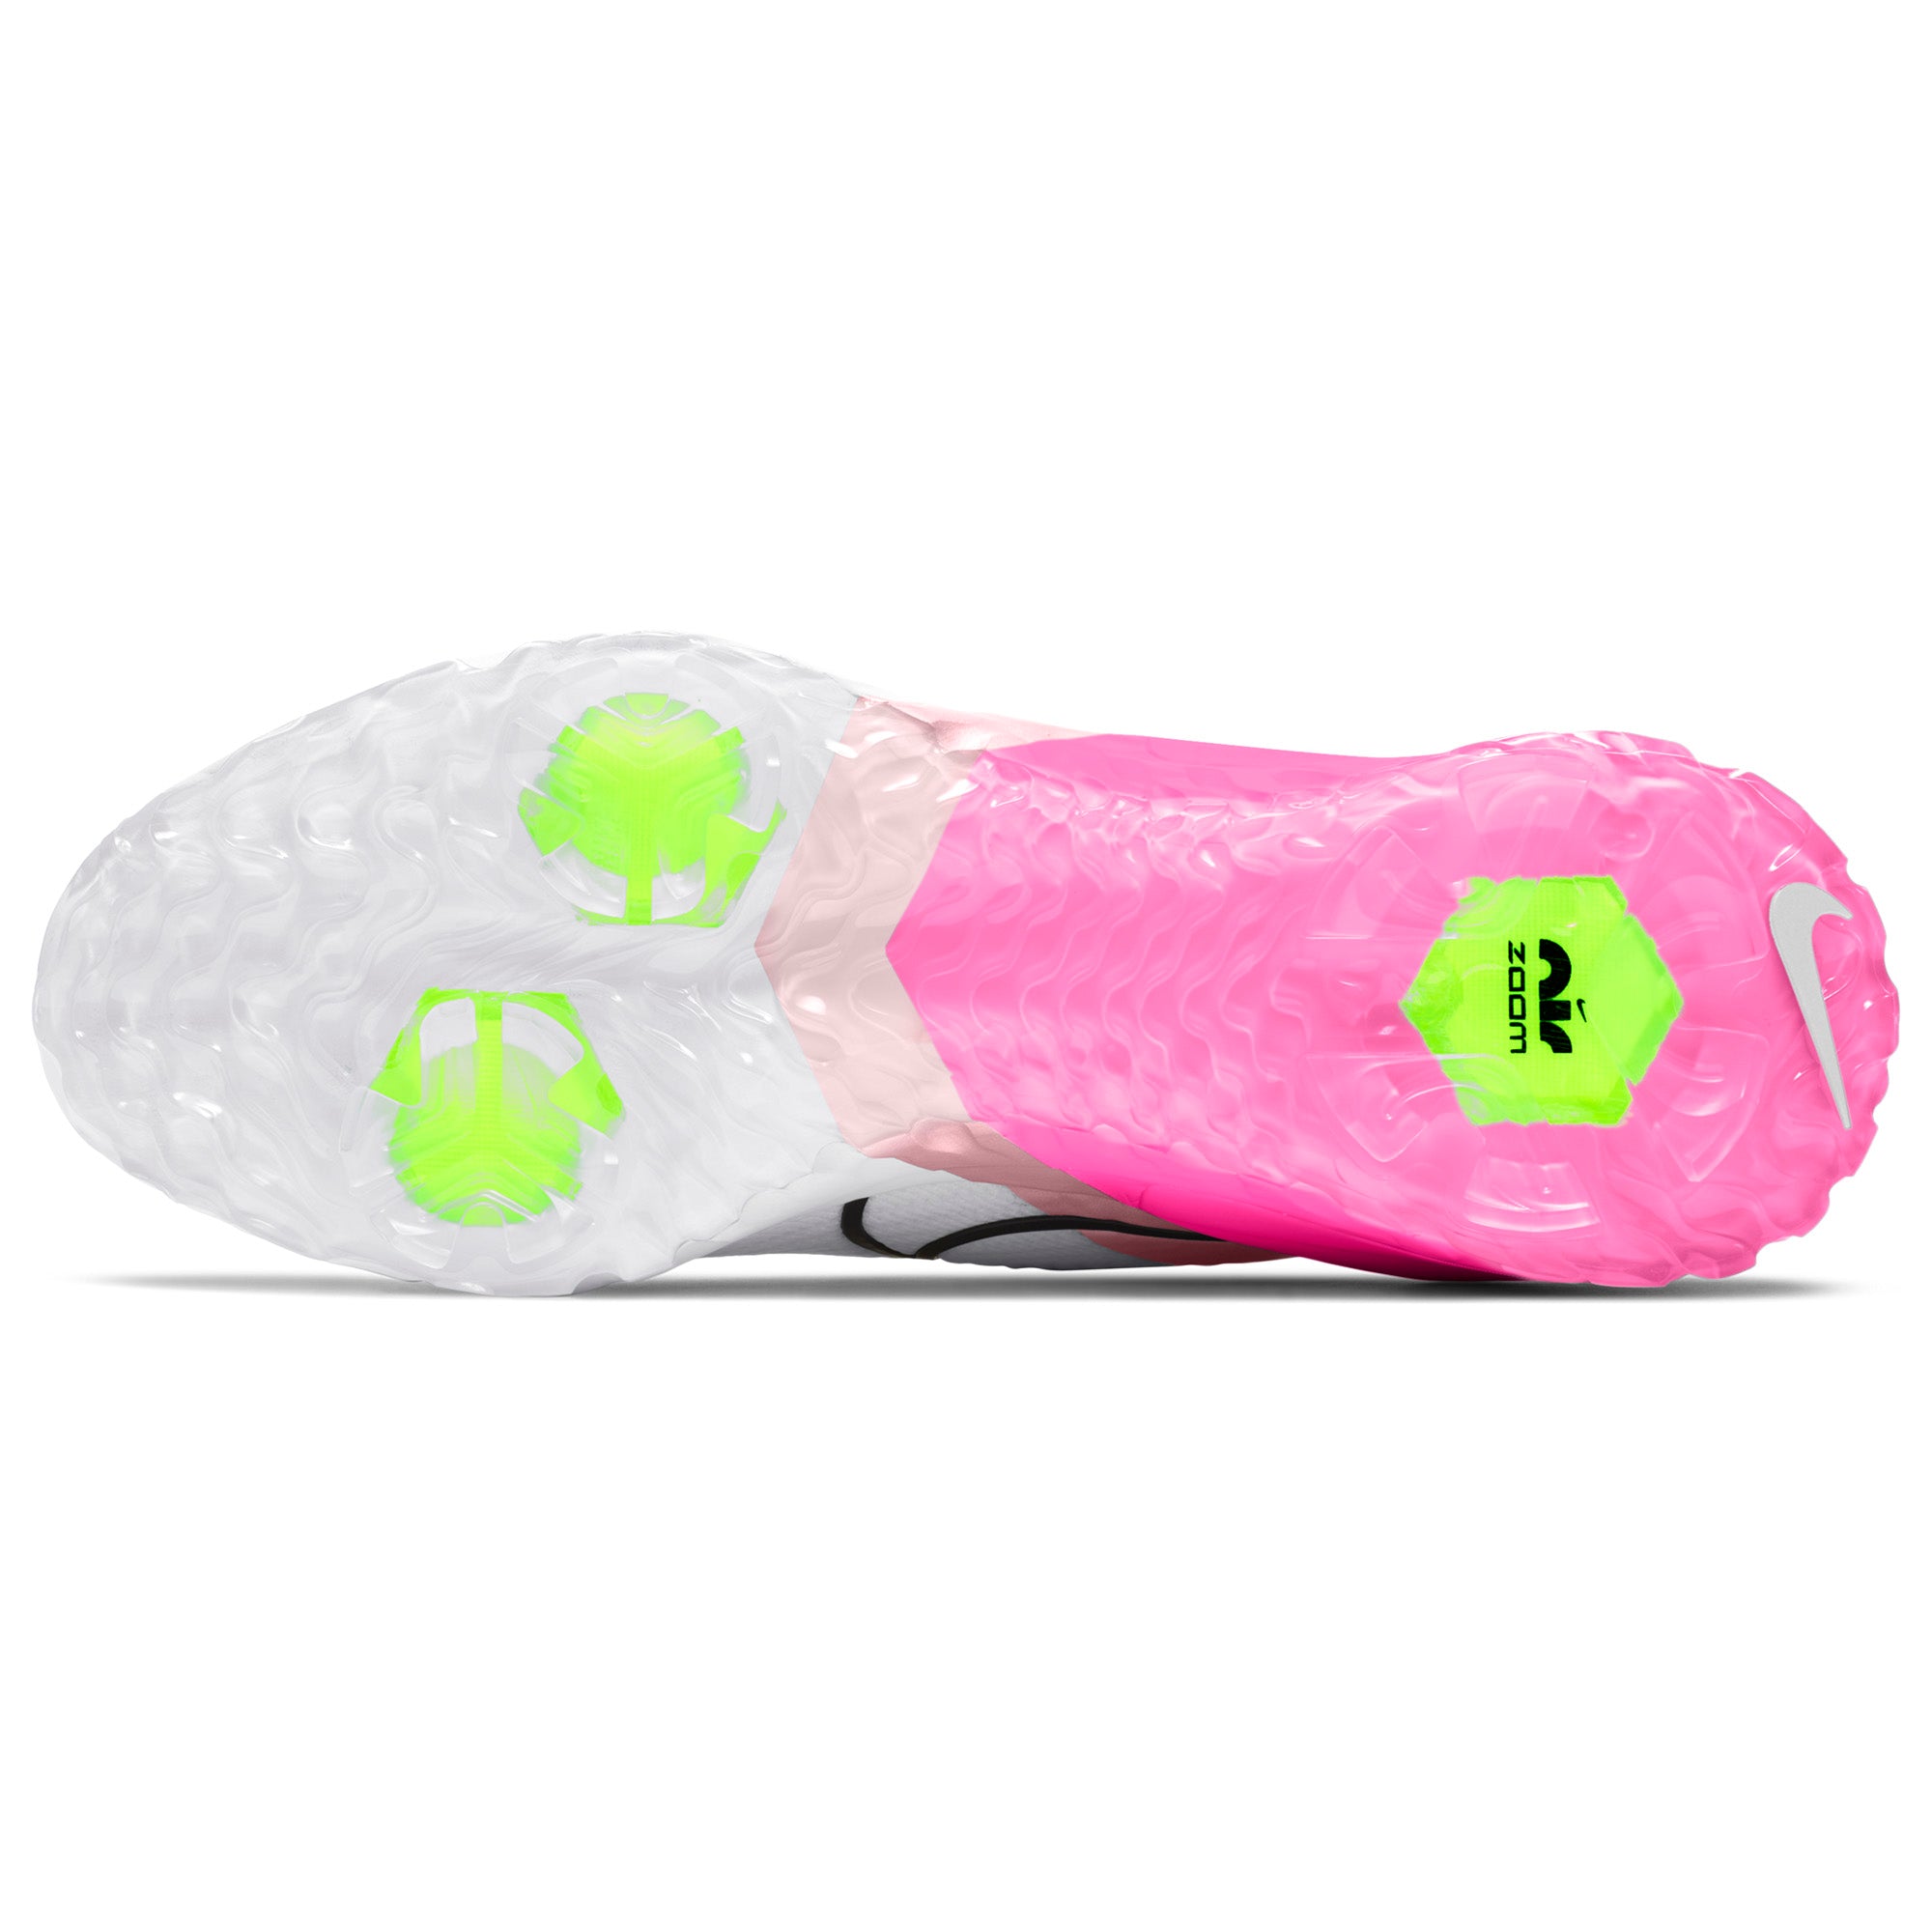 pink nike golf shoes